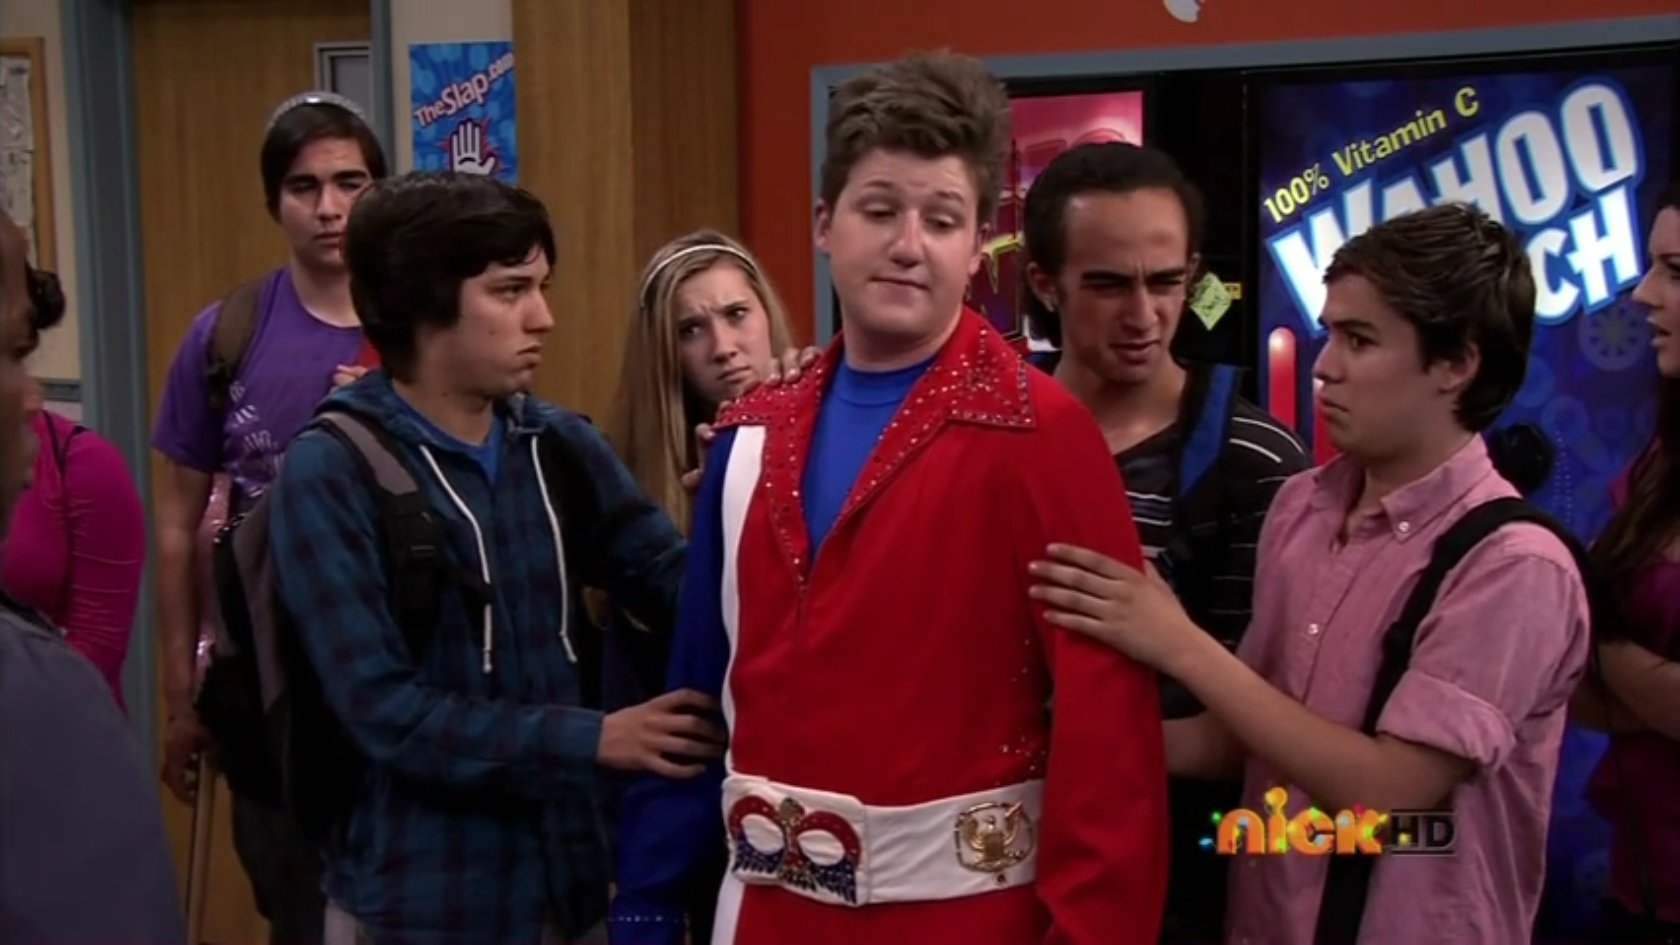 David Buehrle as Tom Fineman on VICTORIOUS